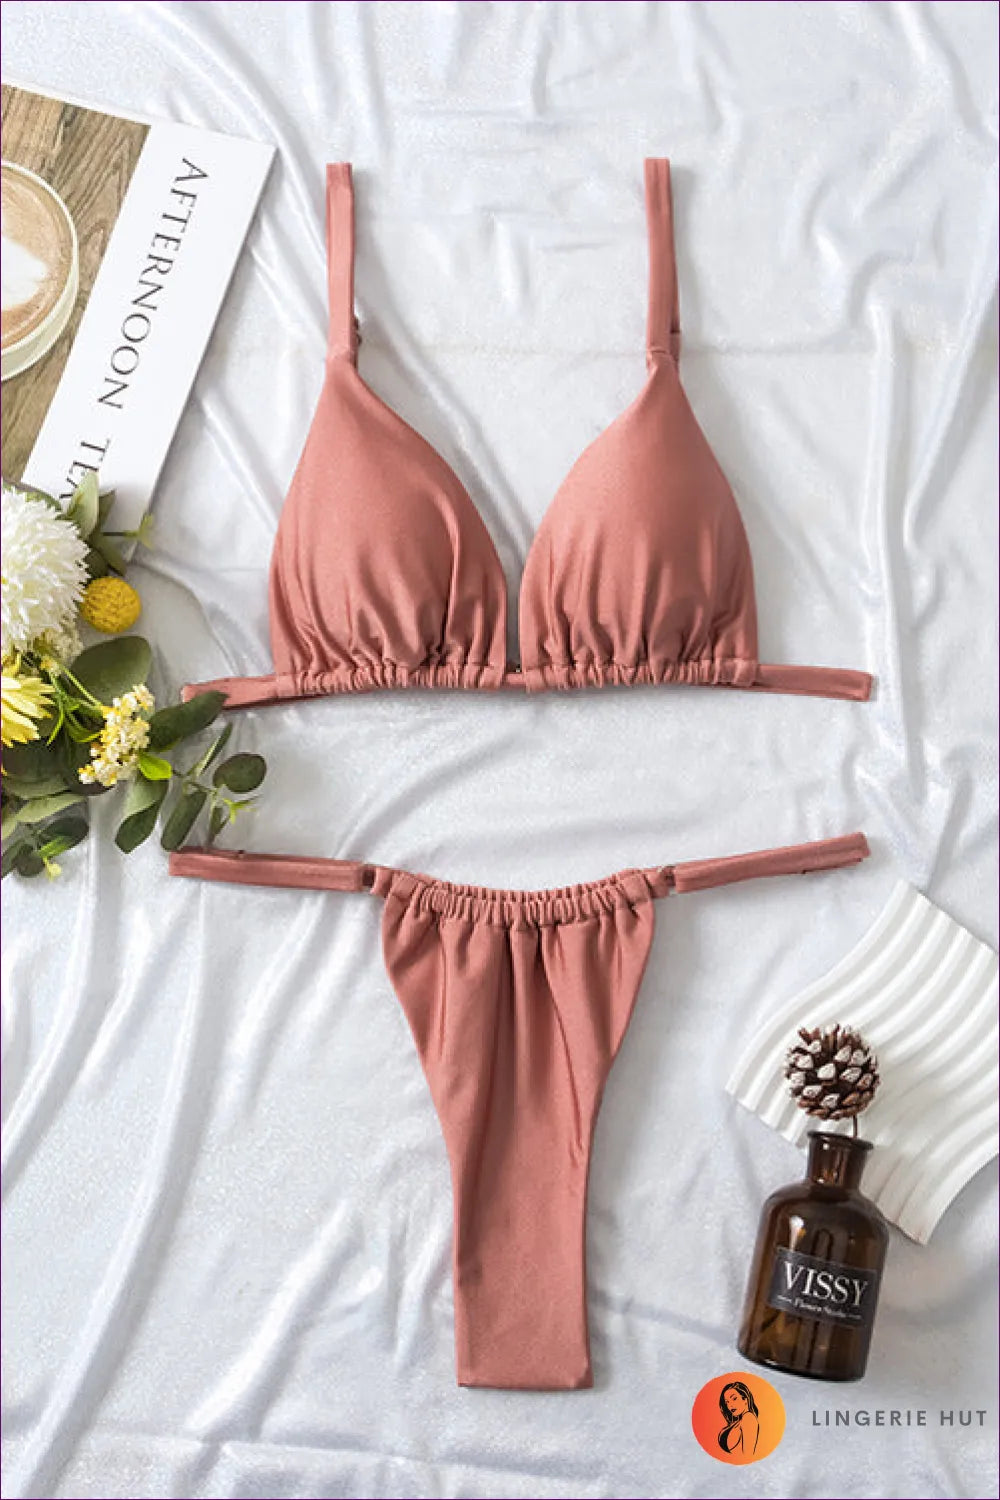 Dive Into Boho Bliss With Lingerie Hut’s High-cut, Pleated Swimsuit Featuring Double-sided Fabric. Sun-kissed